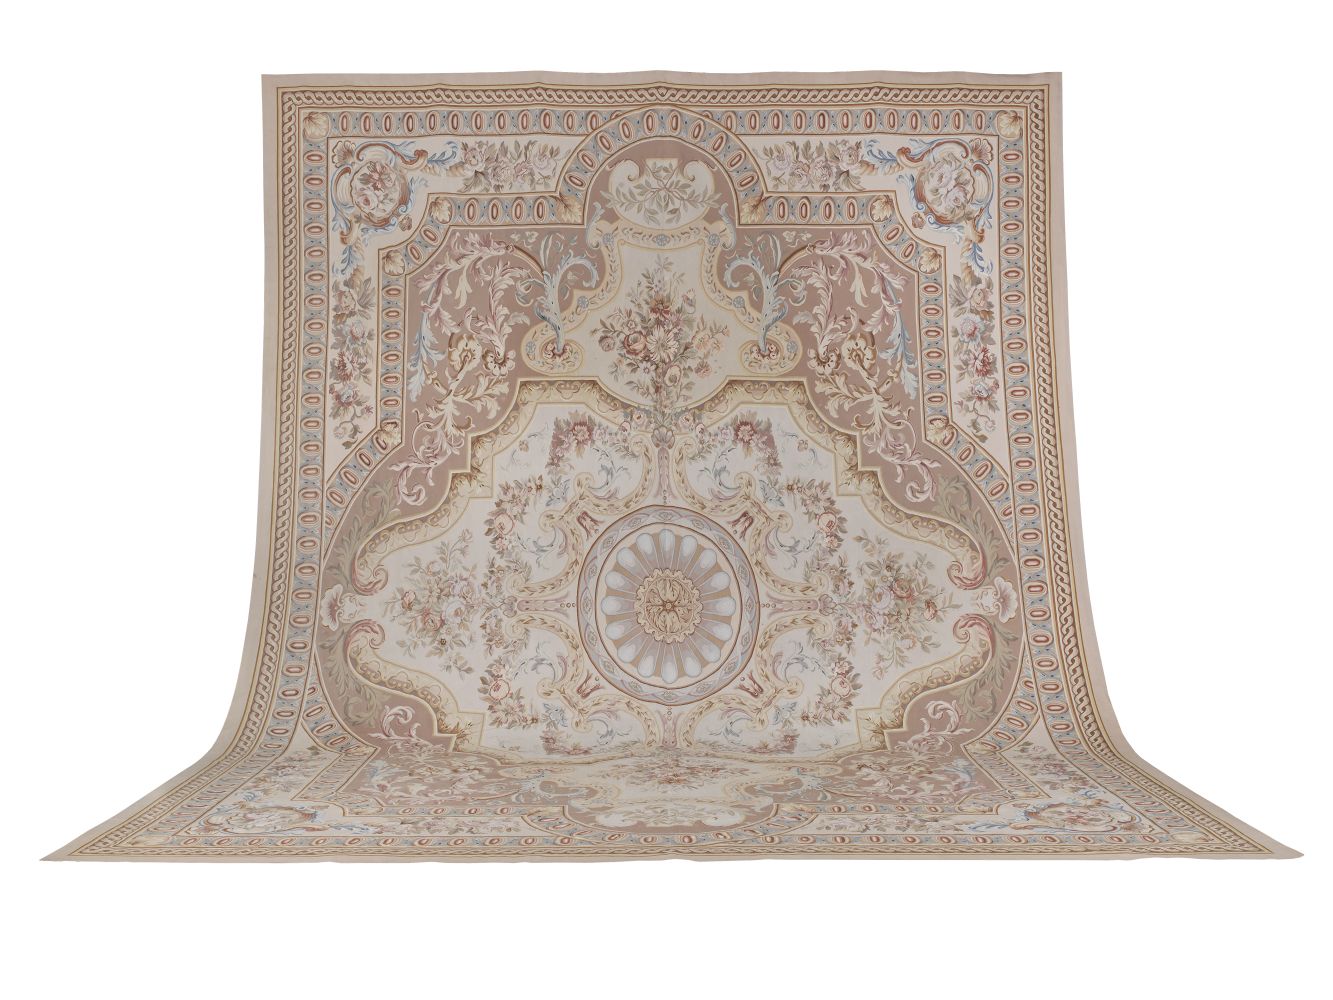 A LARGE AUBUSSON STYLE NEEDLEPOINT CARPET 652cm long x 485cm wide (256in long x 191in wide)